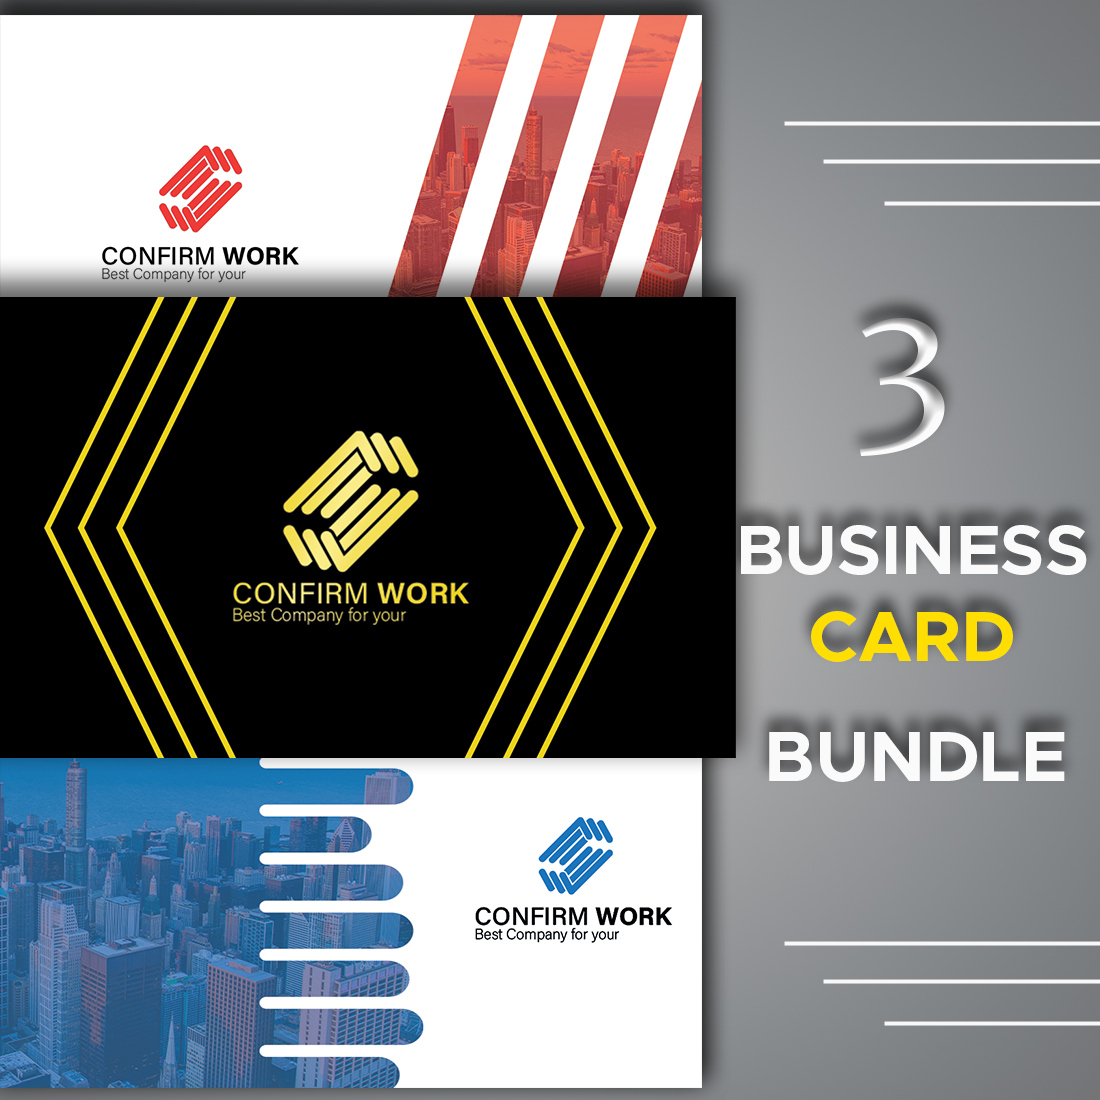 3 BUSINESS CARD BUNDLE cover image.